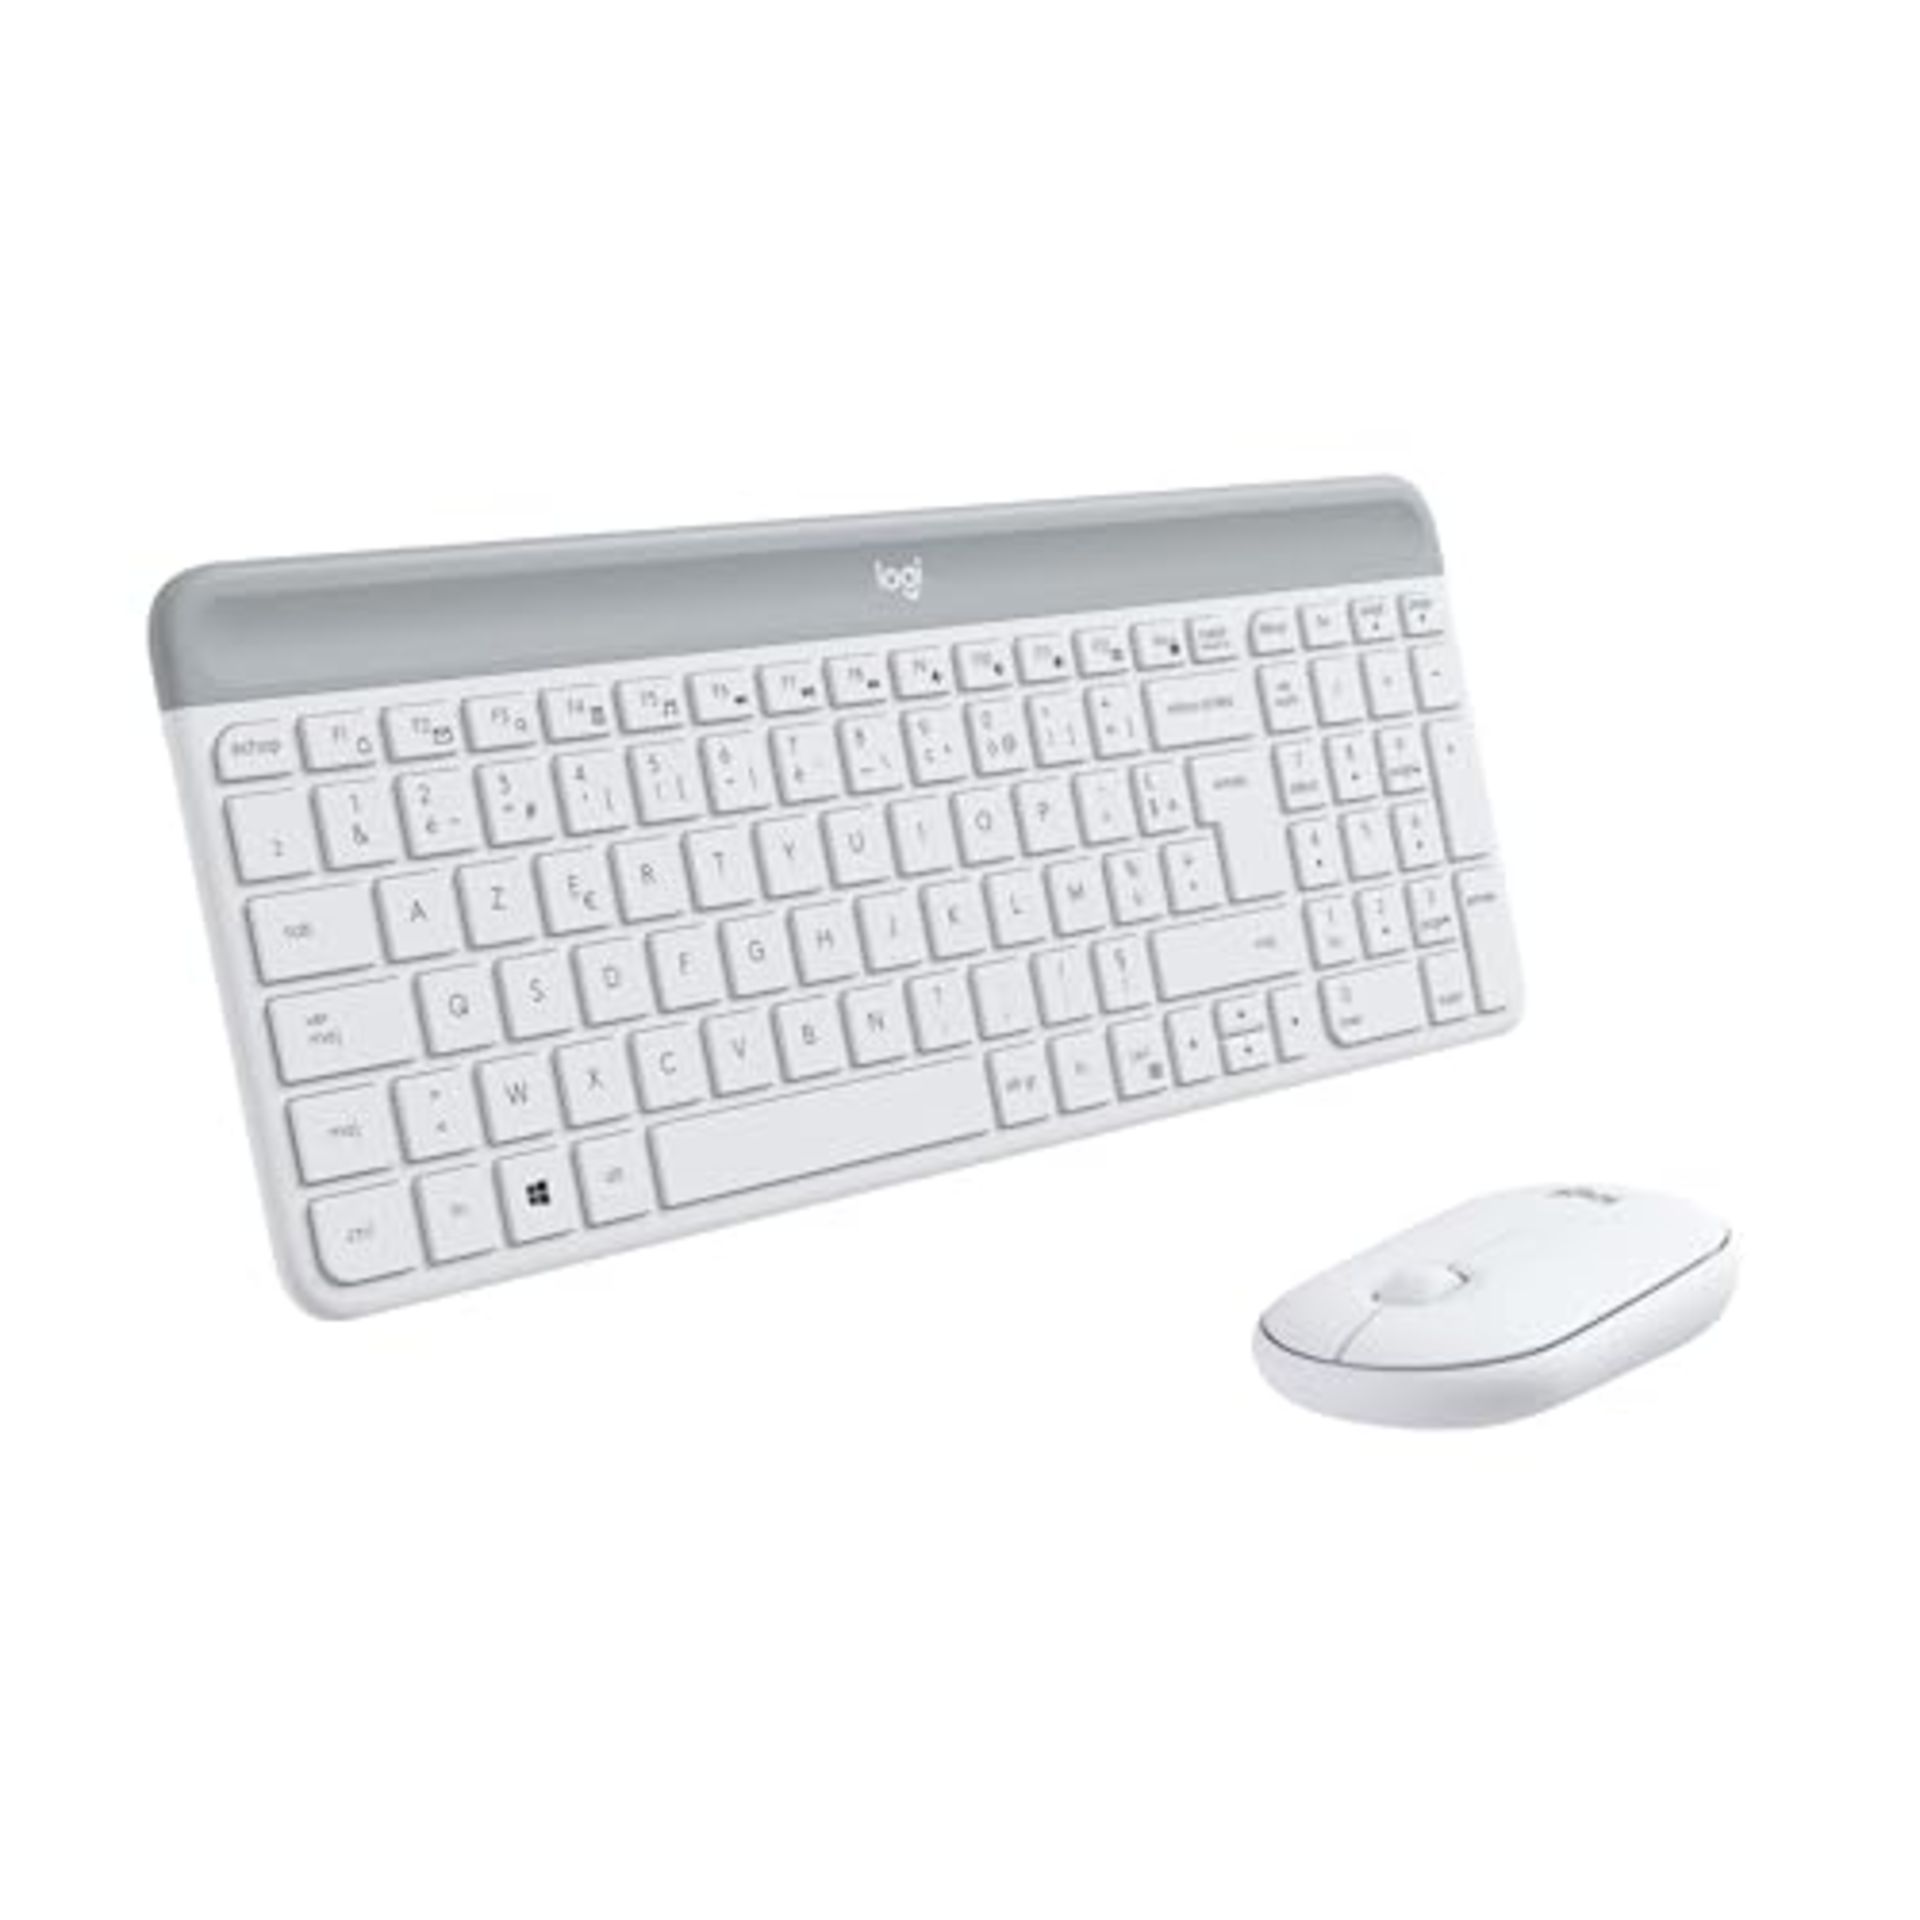 Logitech MK470 Combo Wireless Keyboard and Mouse for Windows, 2.4 GHz with USB Unifyin